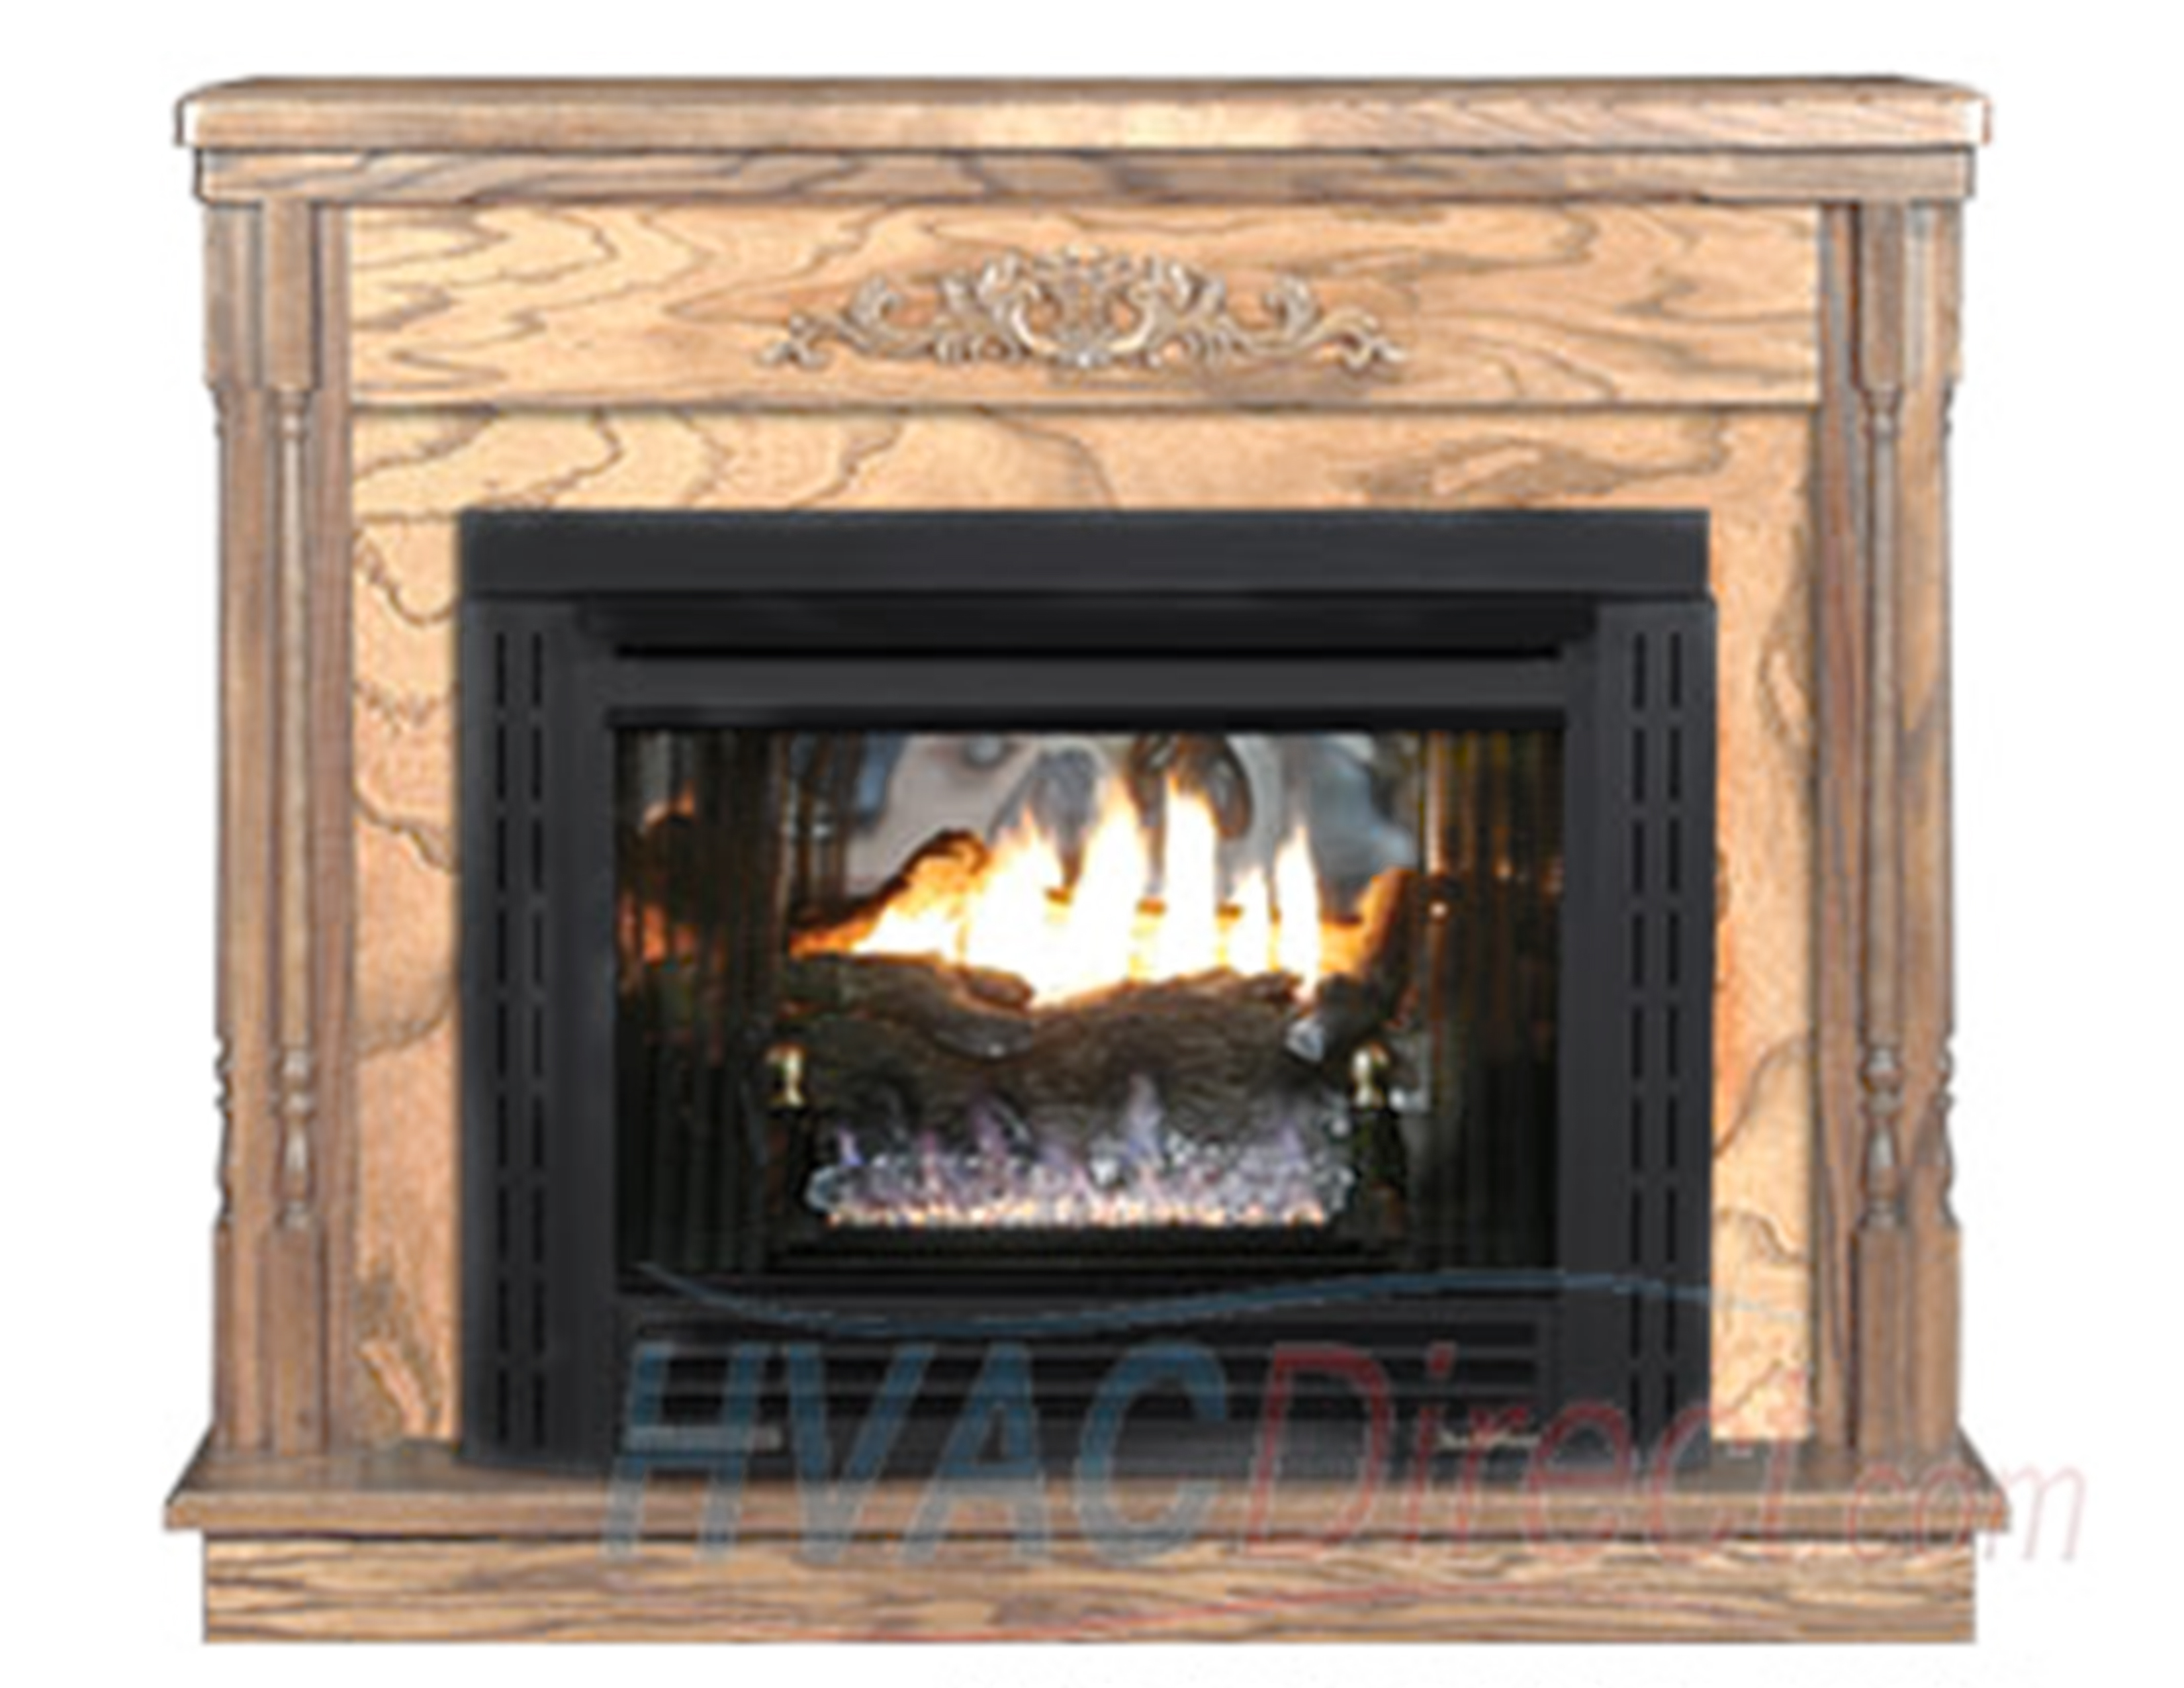 Gas Fireplace Electronic Ignition Retrofit Best Of Buck Stove Model 34zc Vent Free Gas Fireplace